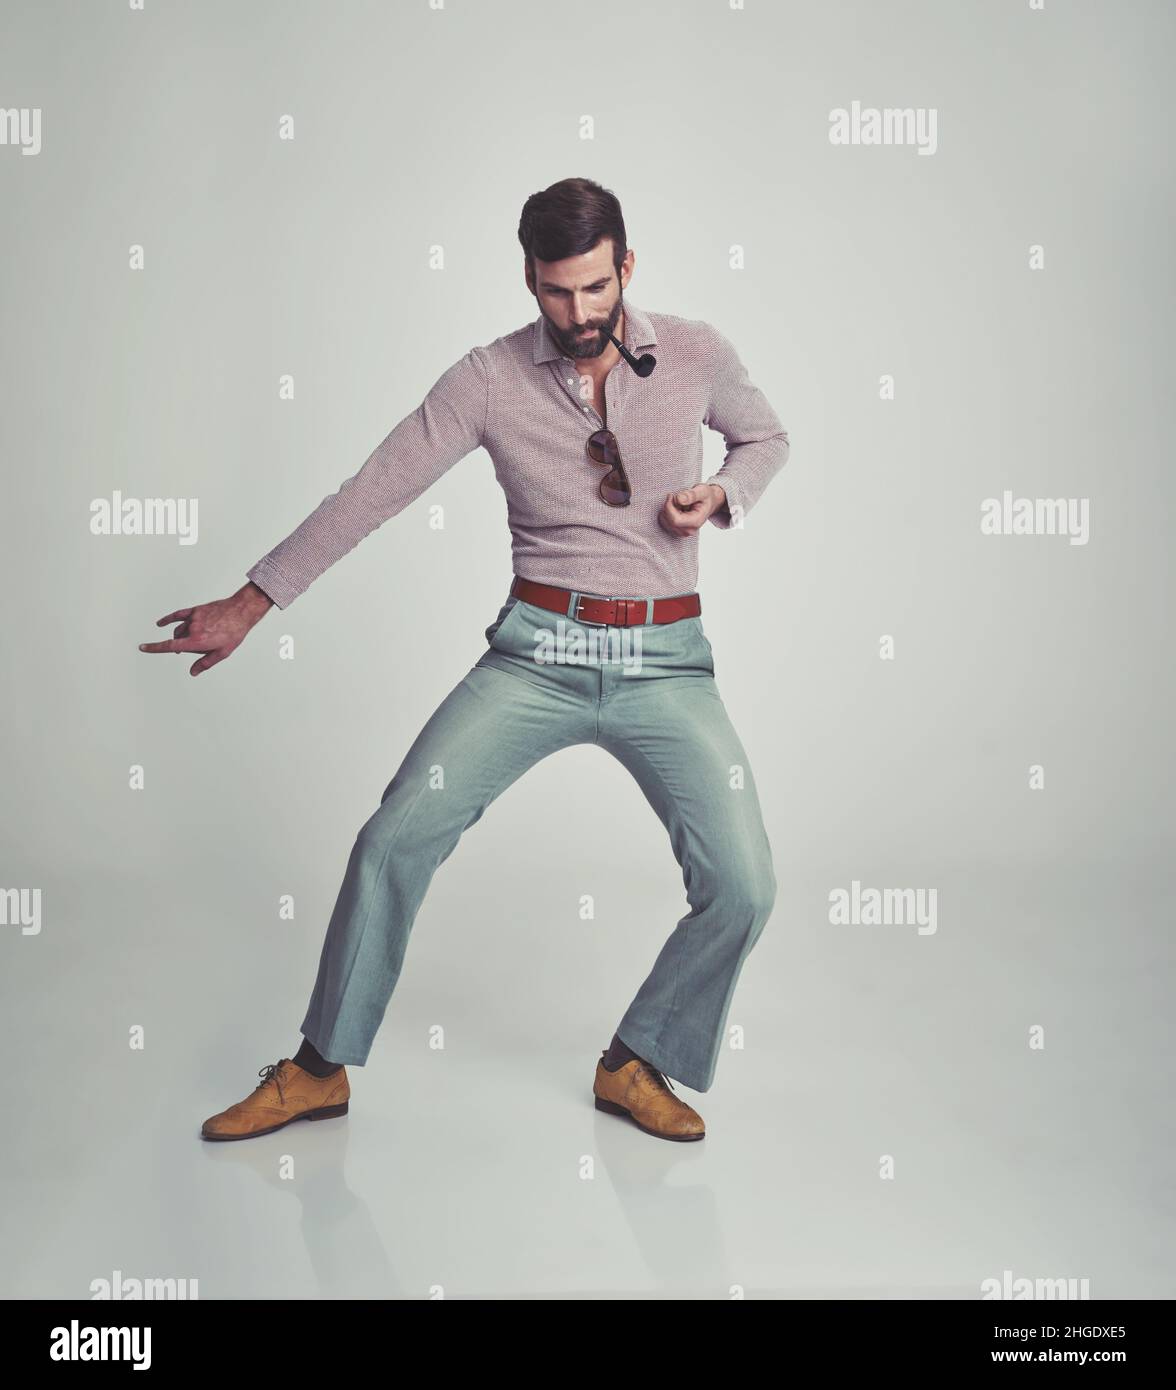 Goofy and groovy. Studio shot of a man in 70's style clothing. Stock Photo